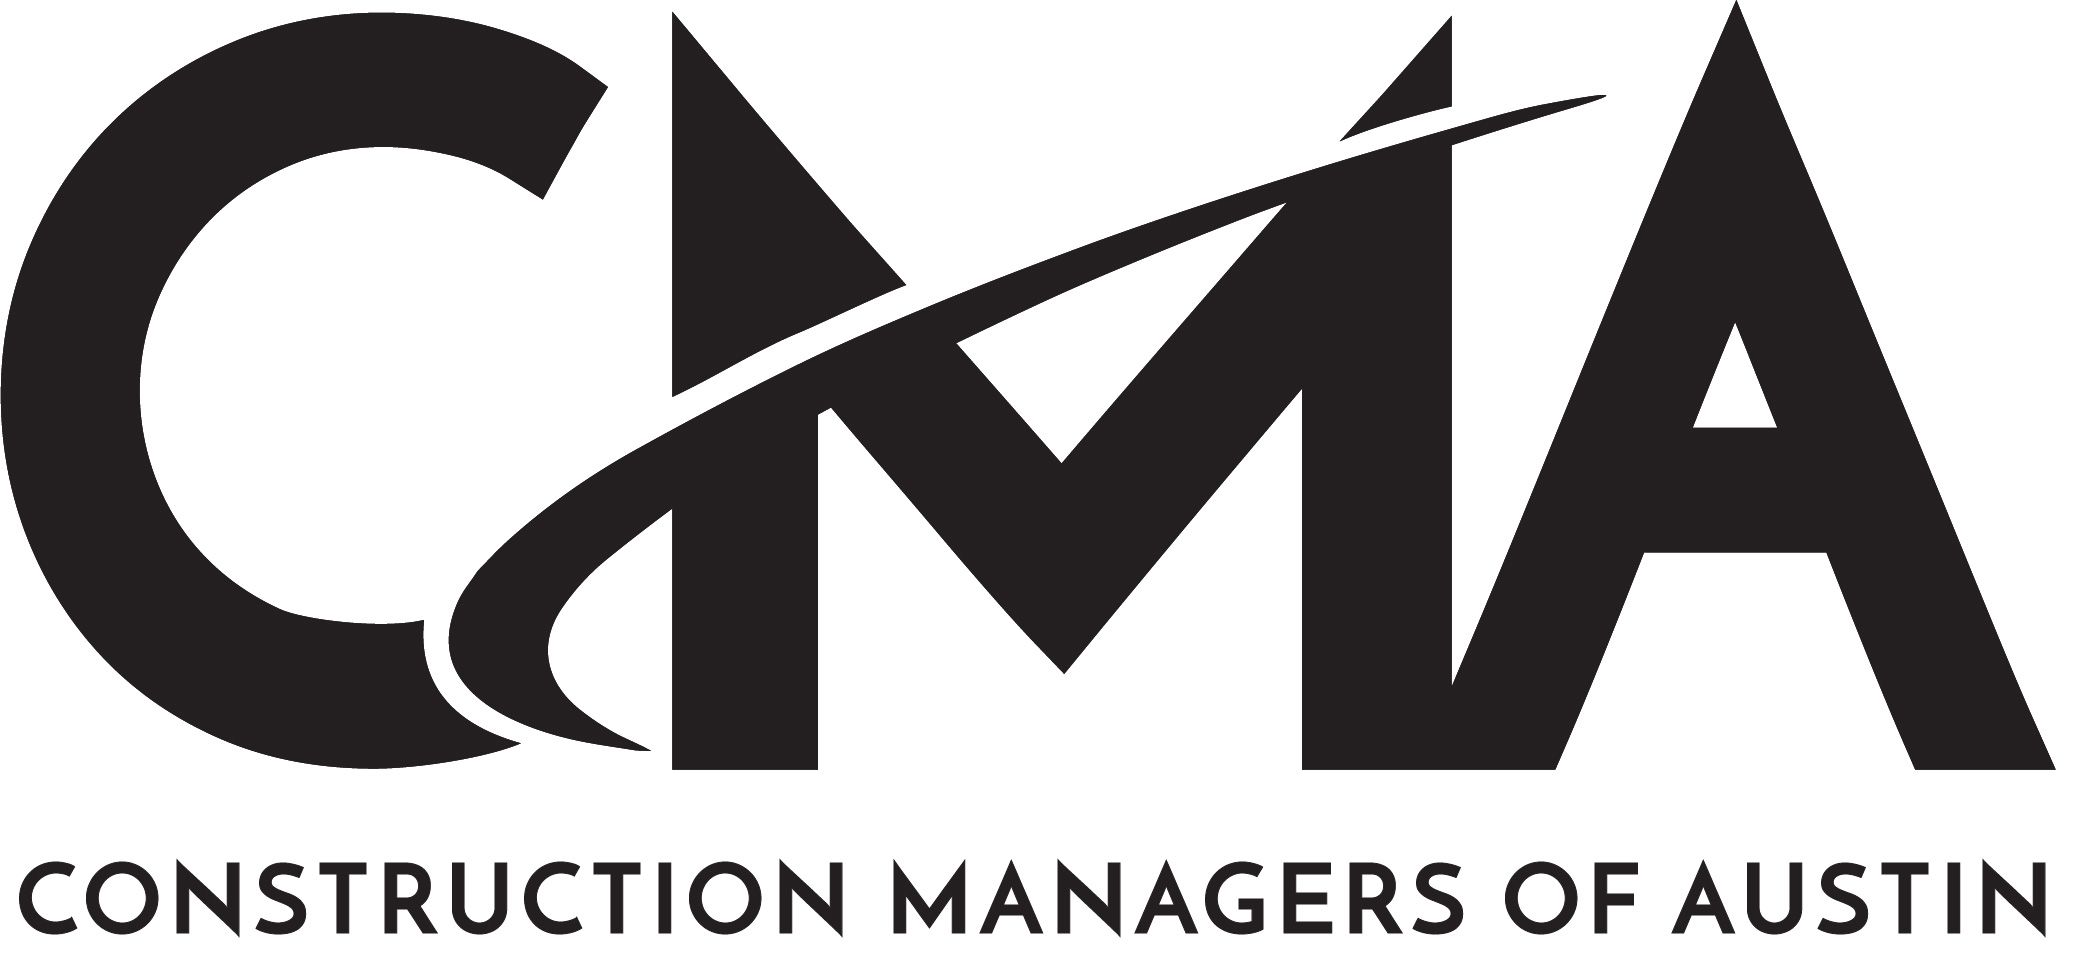 Construction Managers of Austin